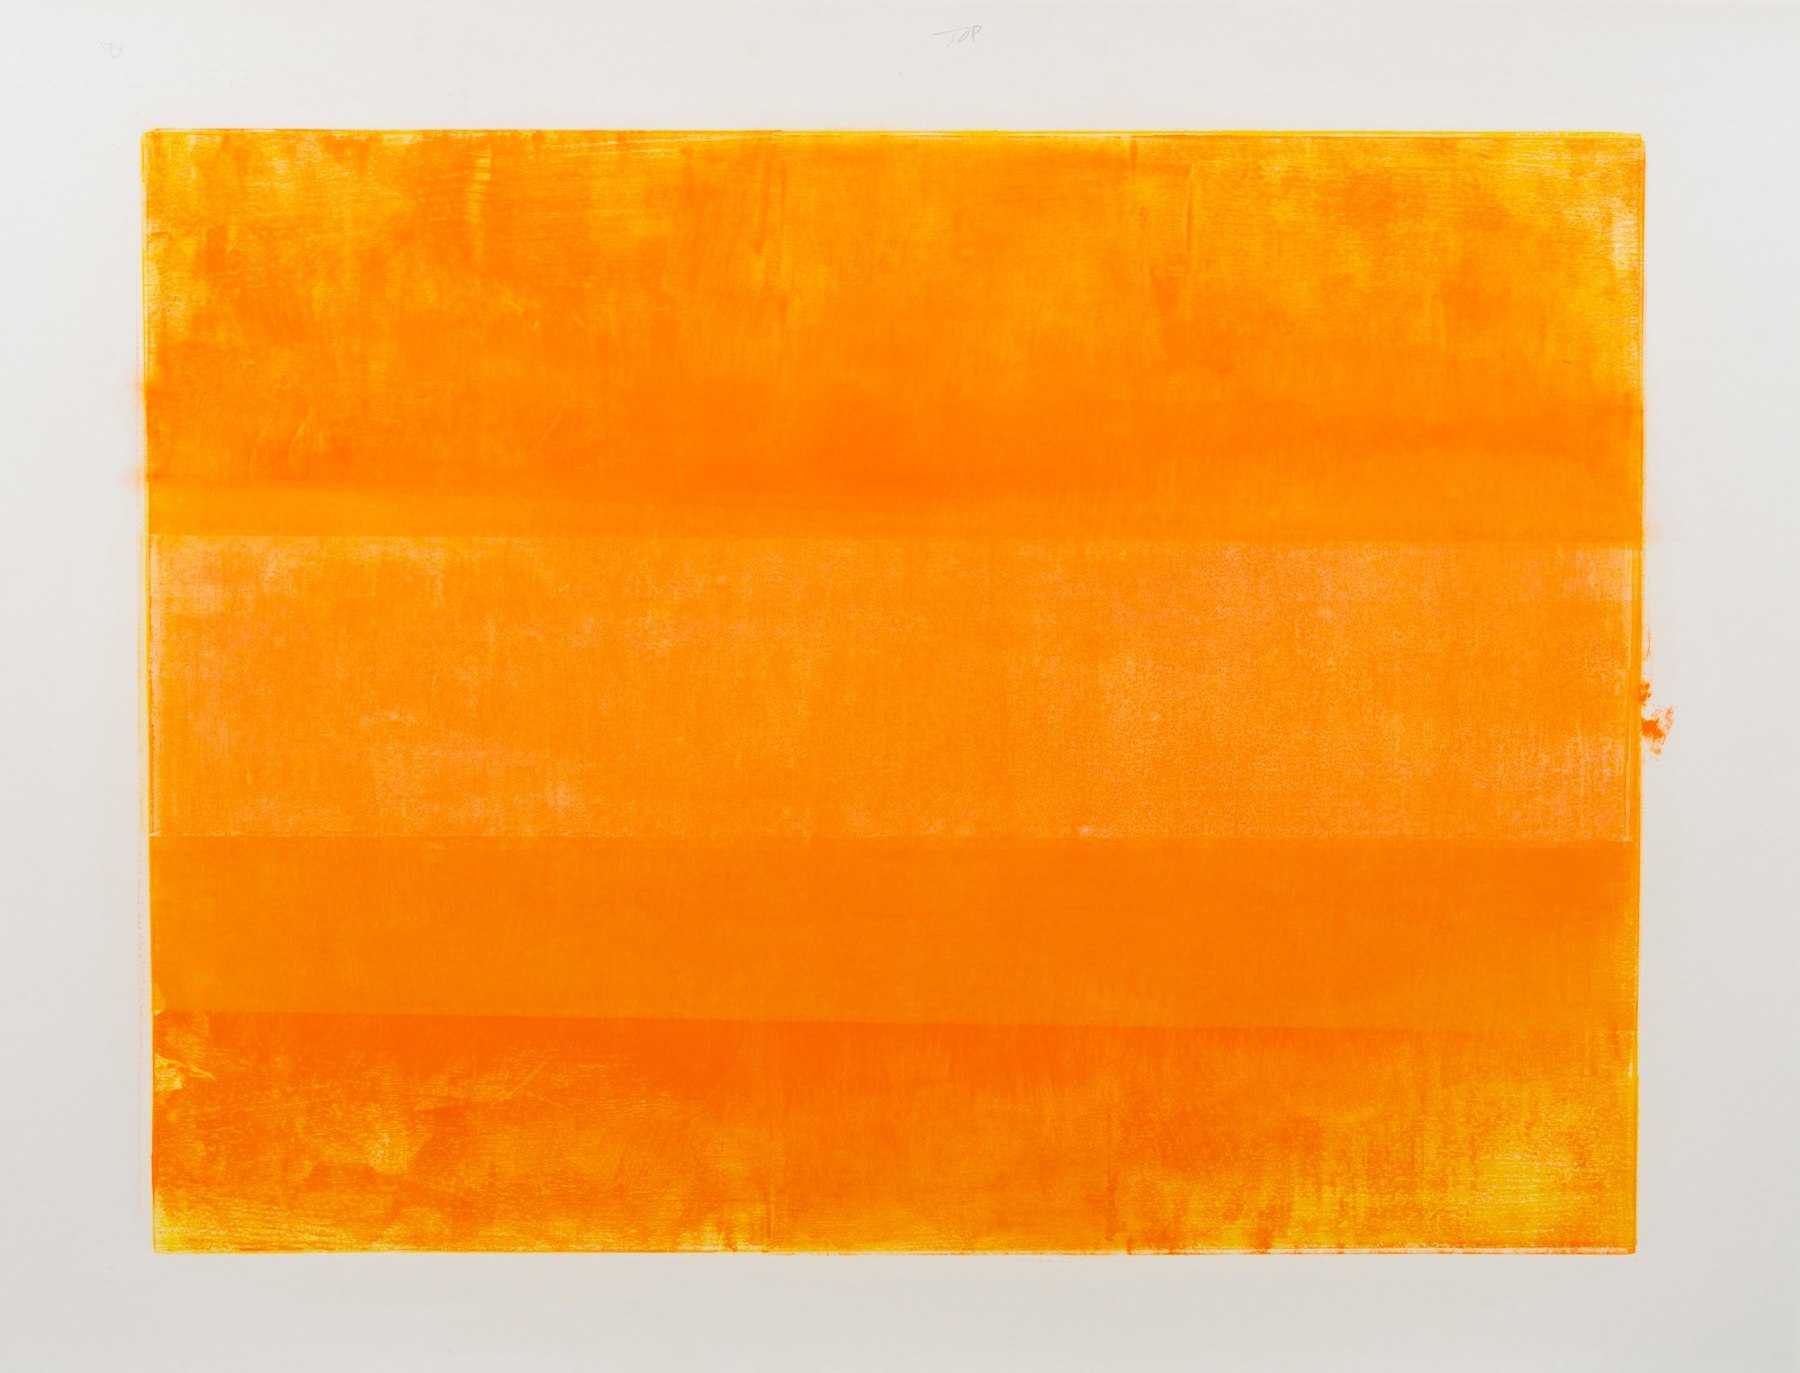 Felrath Hines, Untitled, 1981,  Monotype, 18 x 24 inches. Bright orange vertical rectangles.  Felrath Hines worked to create universal visual idioms from a place of complex personal experience. His figurative and cubist-style artwork morphed into soft-edged organic abstracts as he grappled with hues in his chosen oil medium.